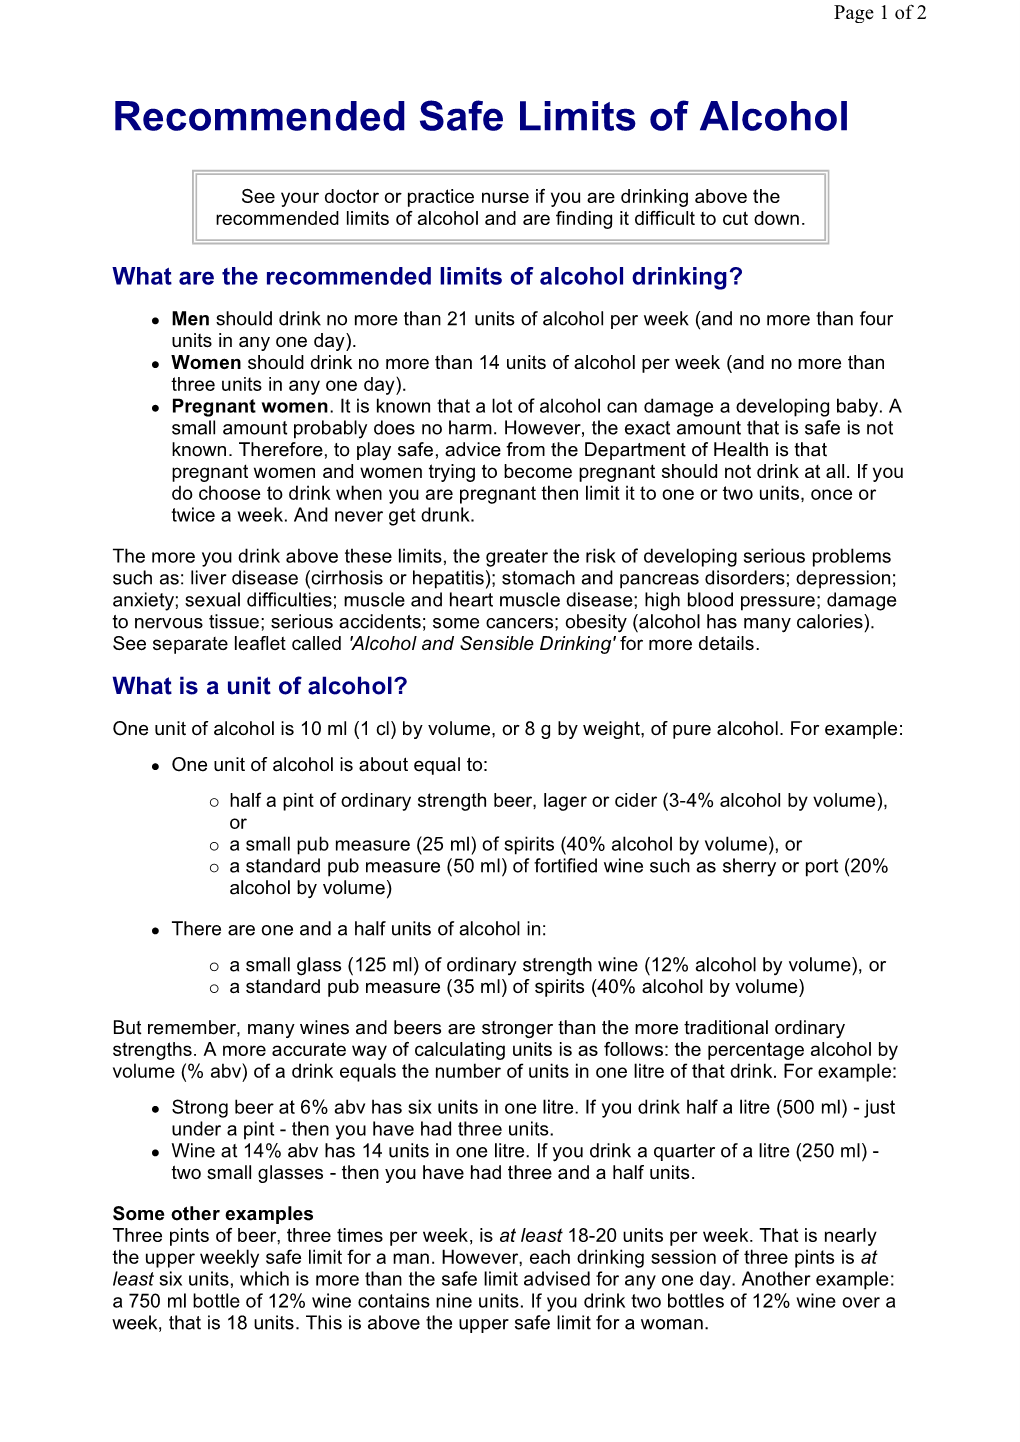 Recommended Safe Limits of Alcohol